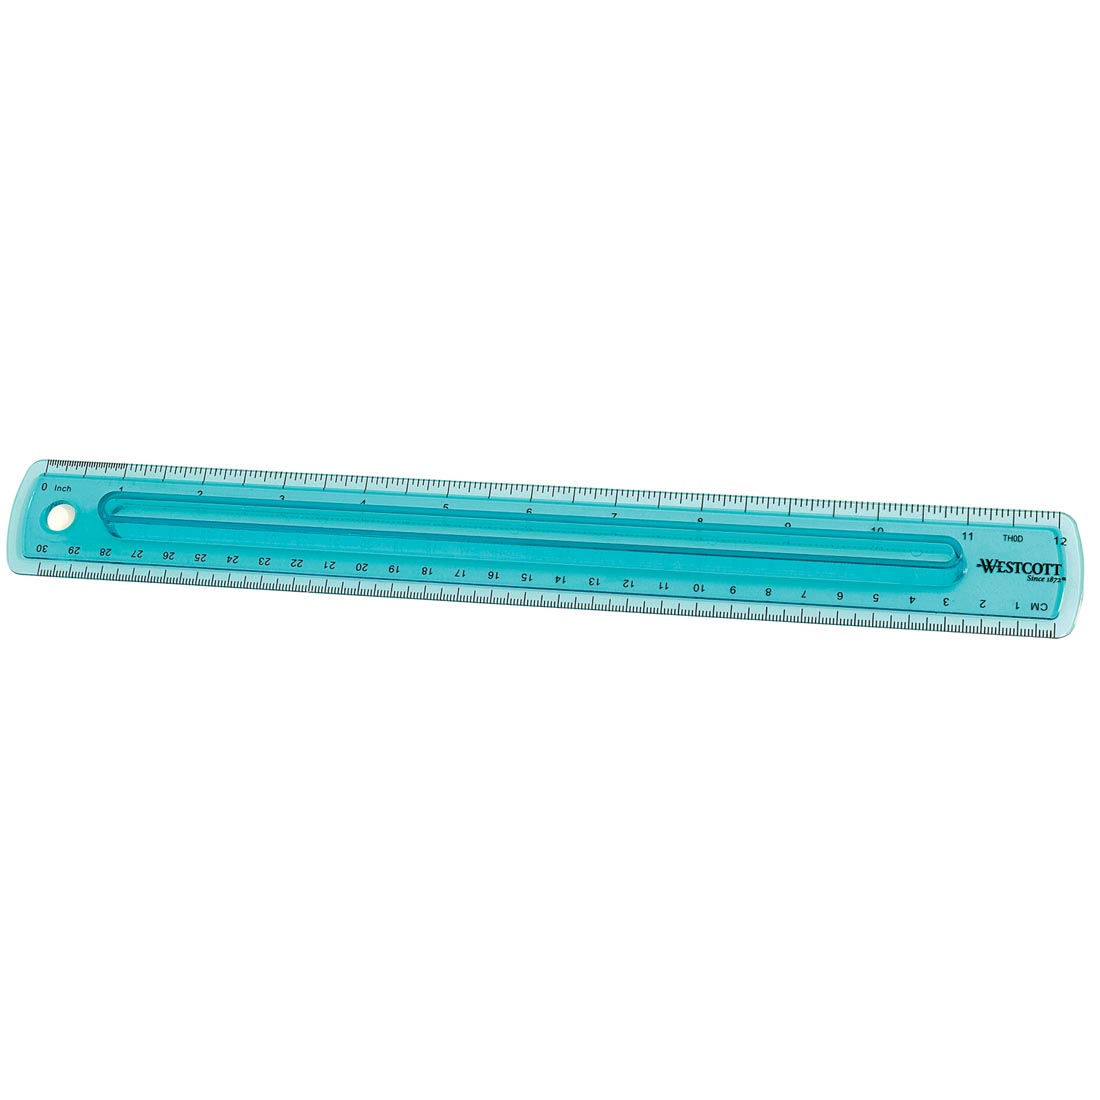 12" ruler with a raised area in the middle for gripping